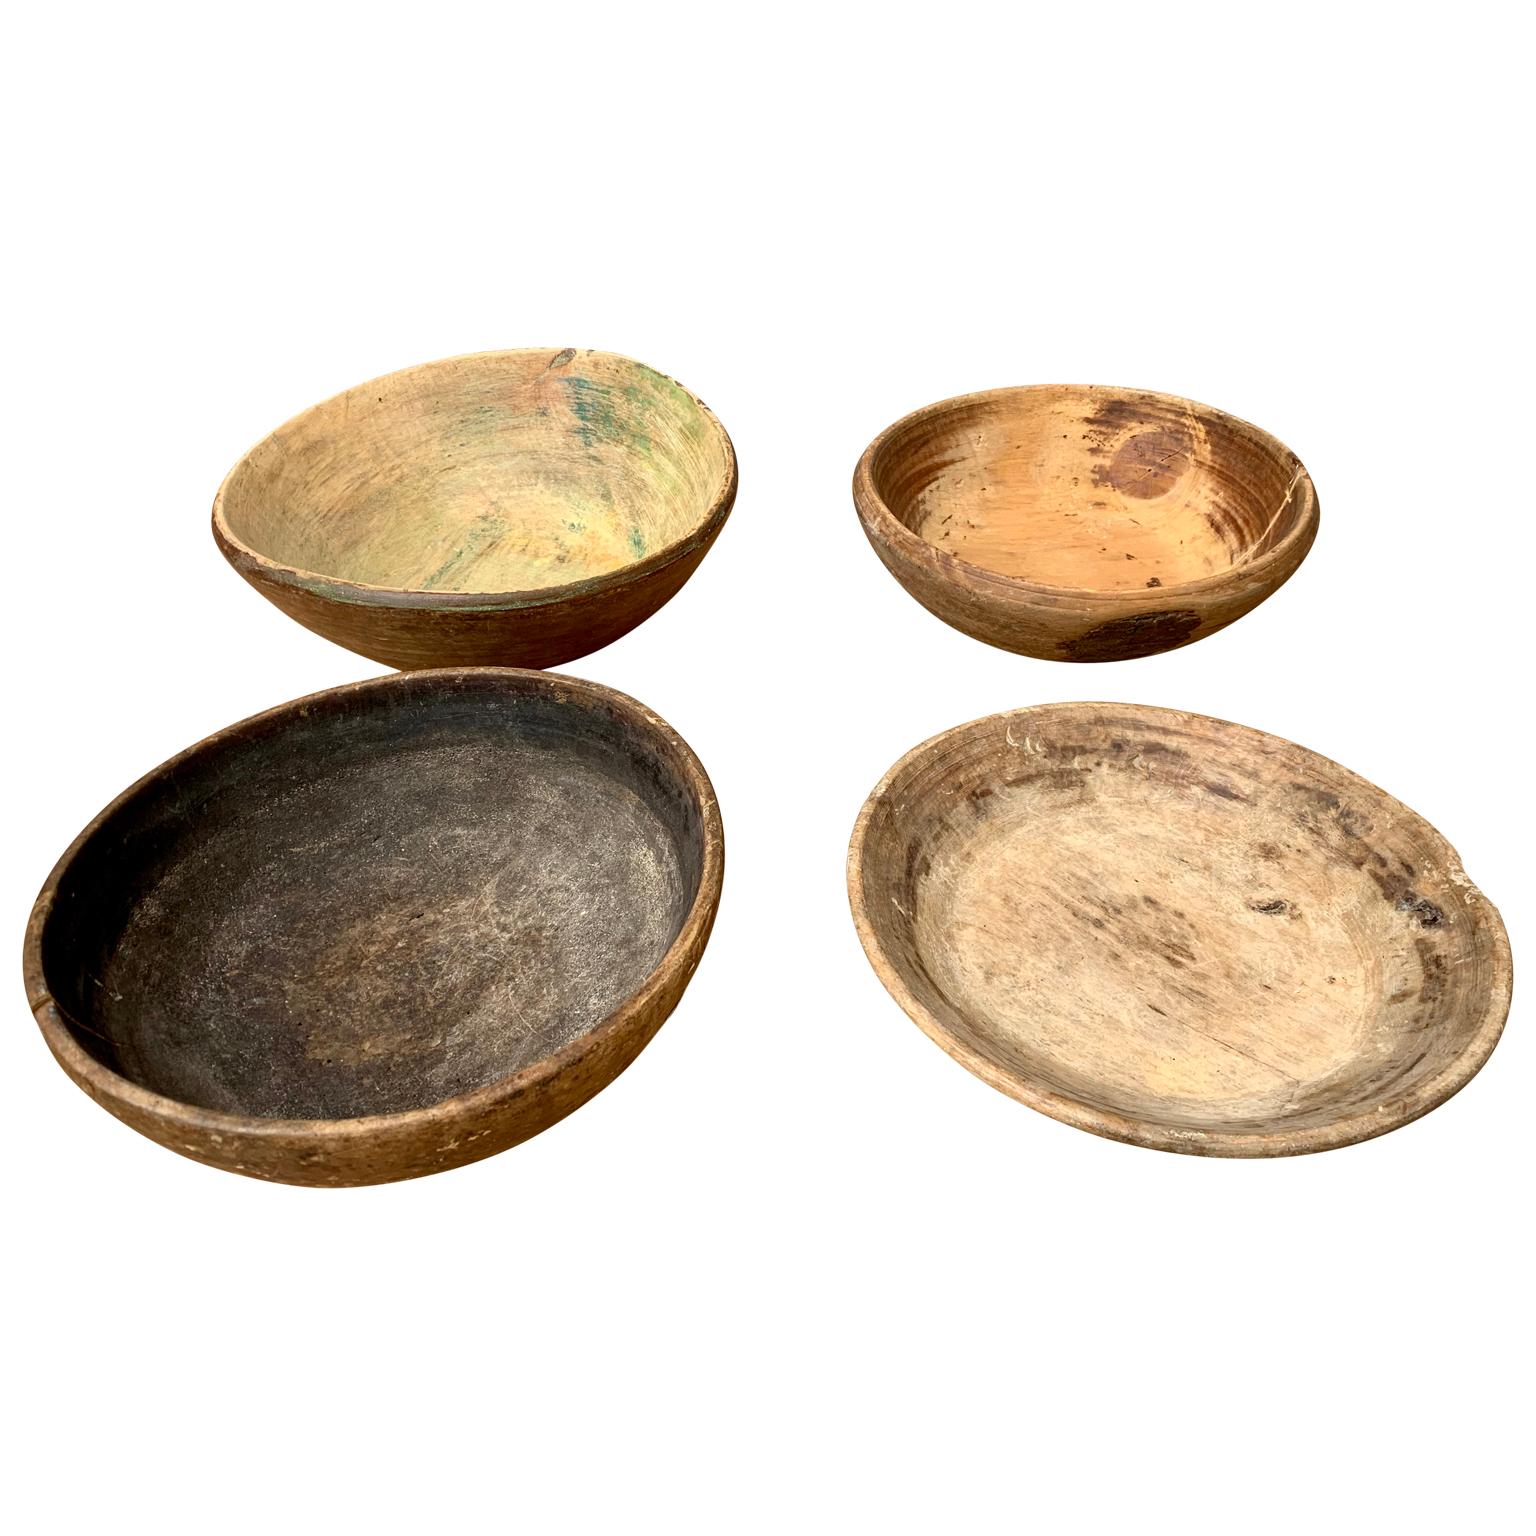 A set of 4 allmoge Swedish wooden Folk Art bowls in birch. In their original color and patina, these types of wooden bowl were used for the preparation and storage of food in the rustic countryside life.

   